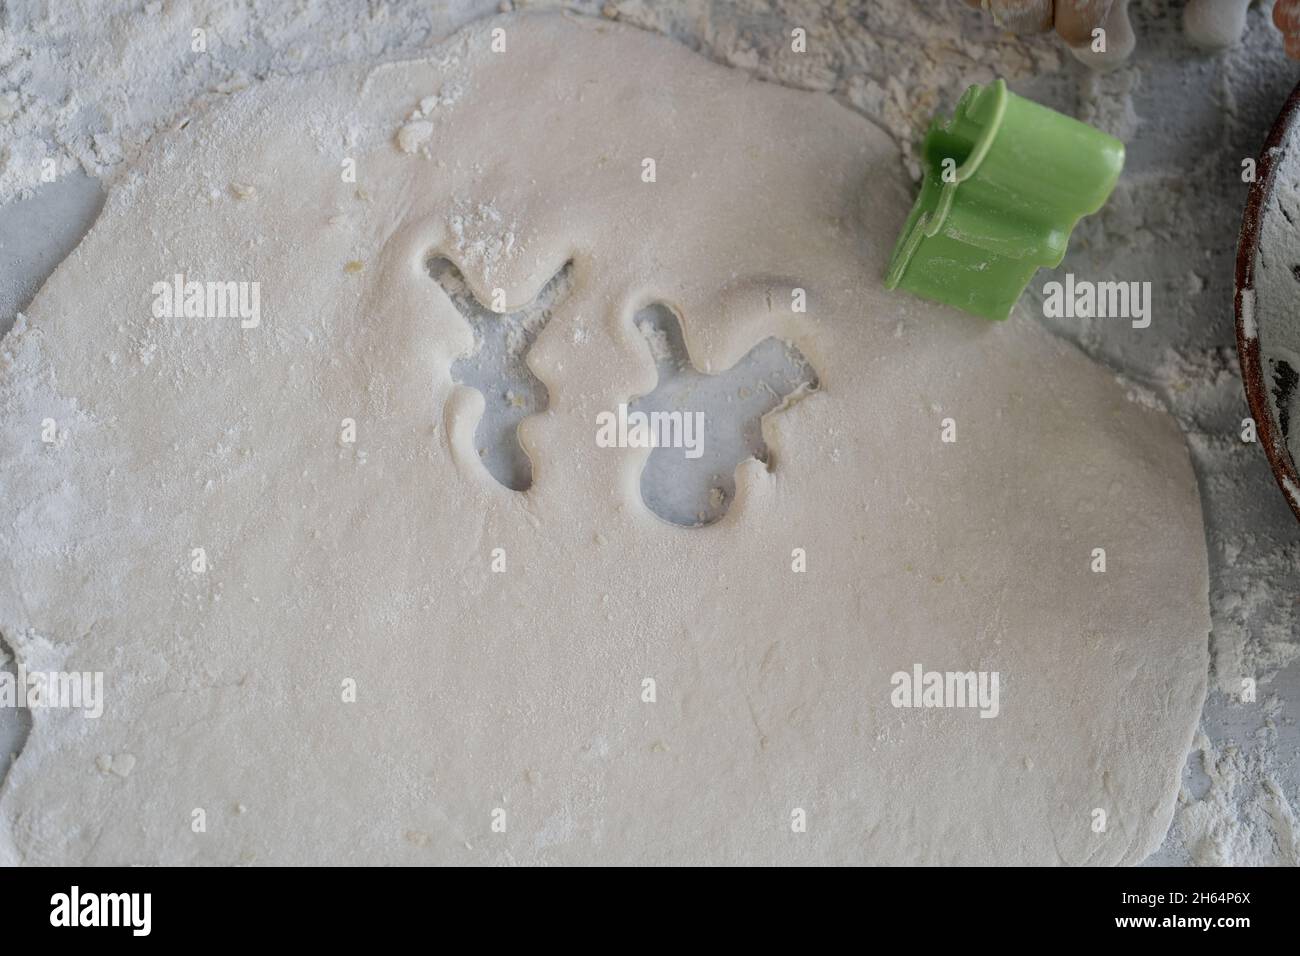 cutting out christmas cookies or gingerbread shape on the table. Sugar cookie mold and raw dough. Stock Photo